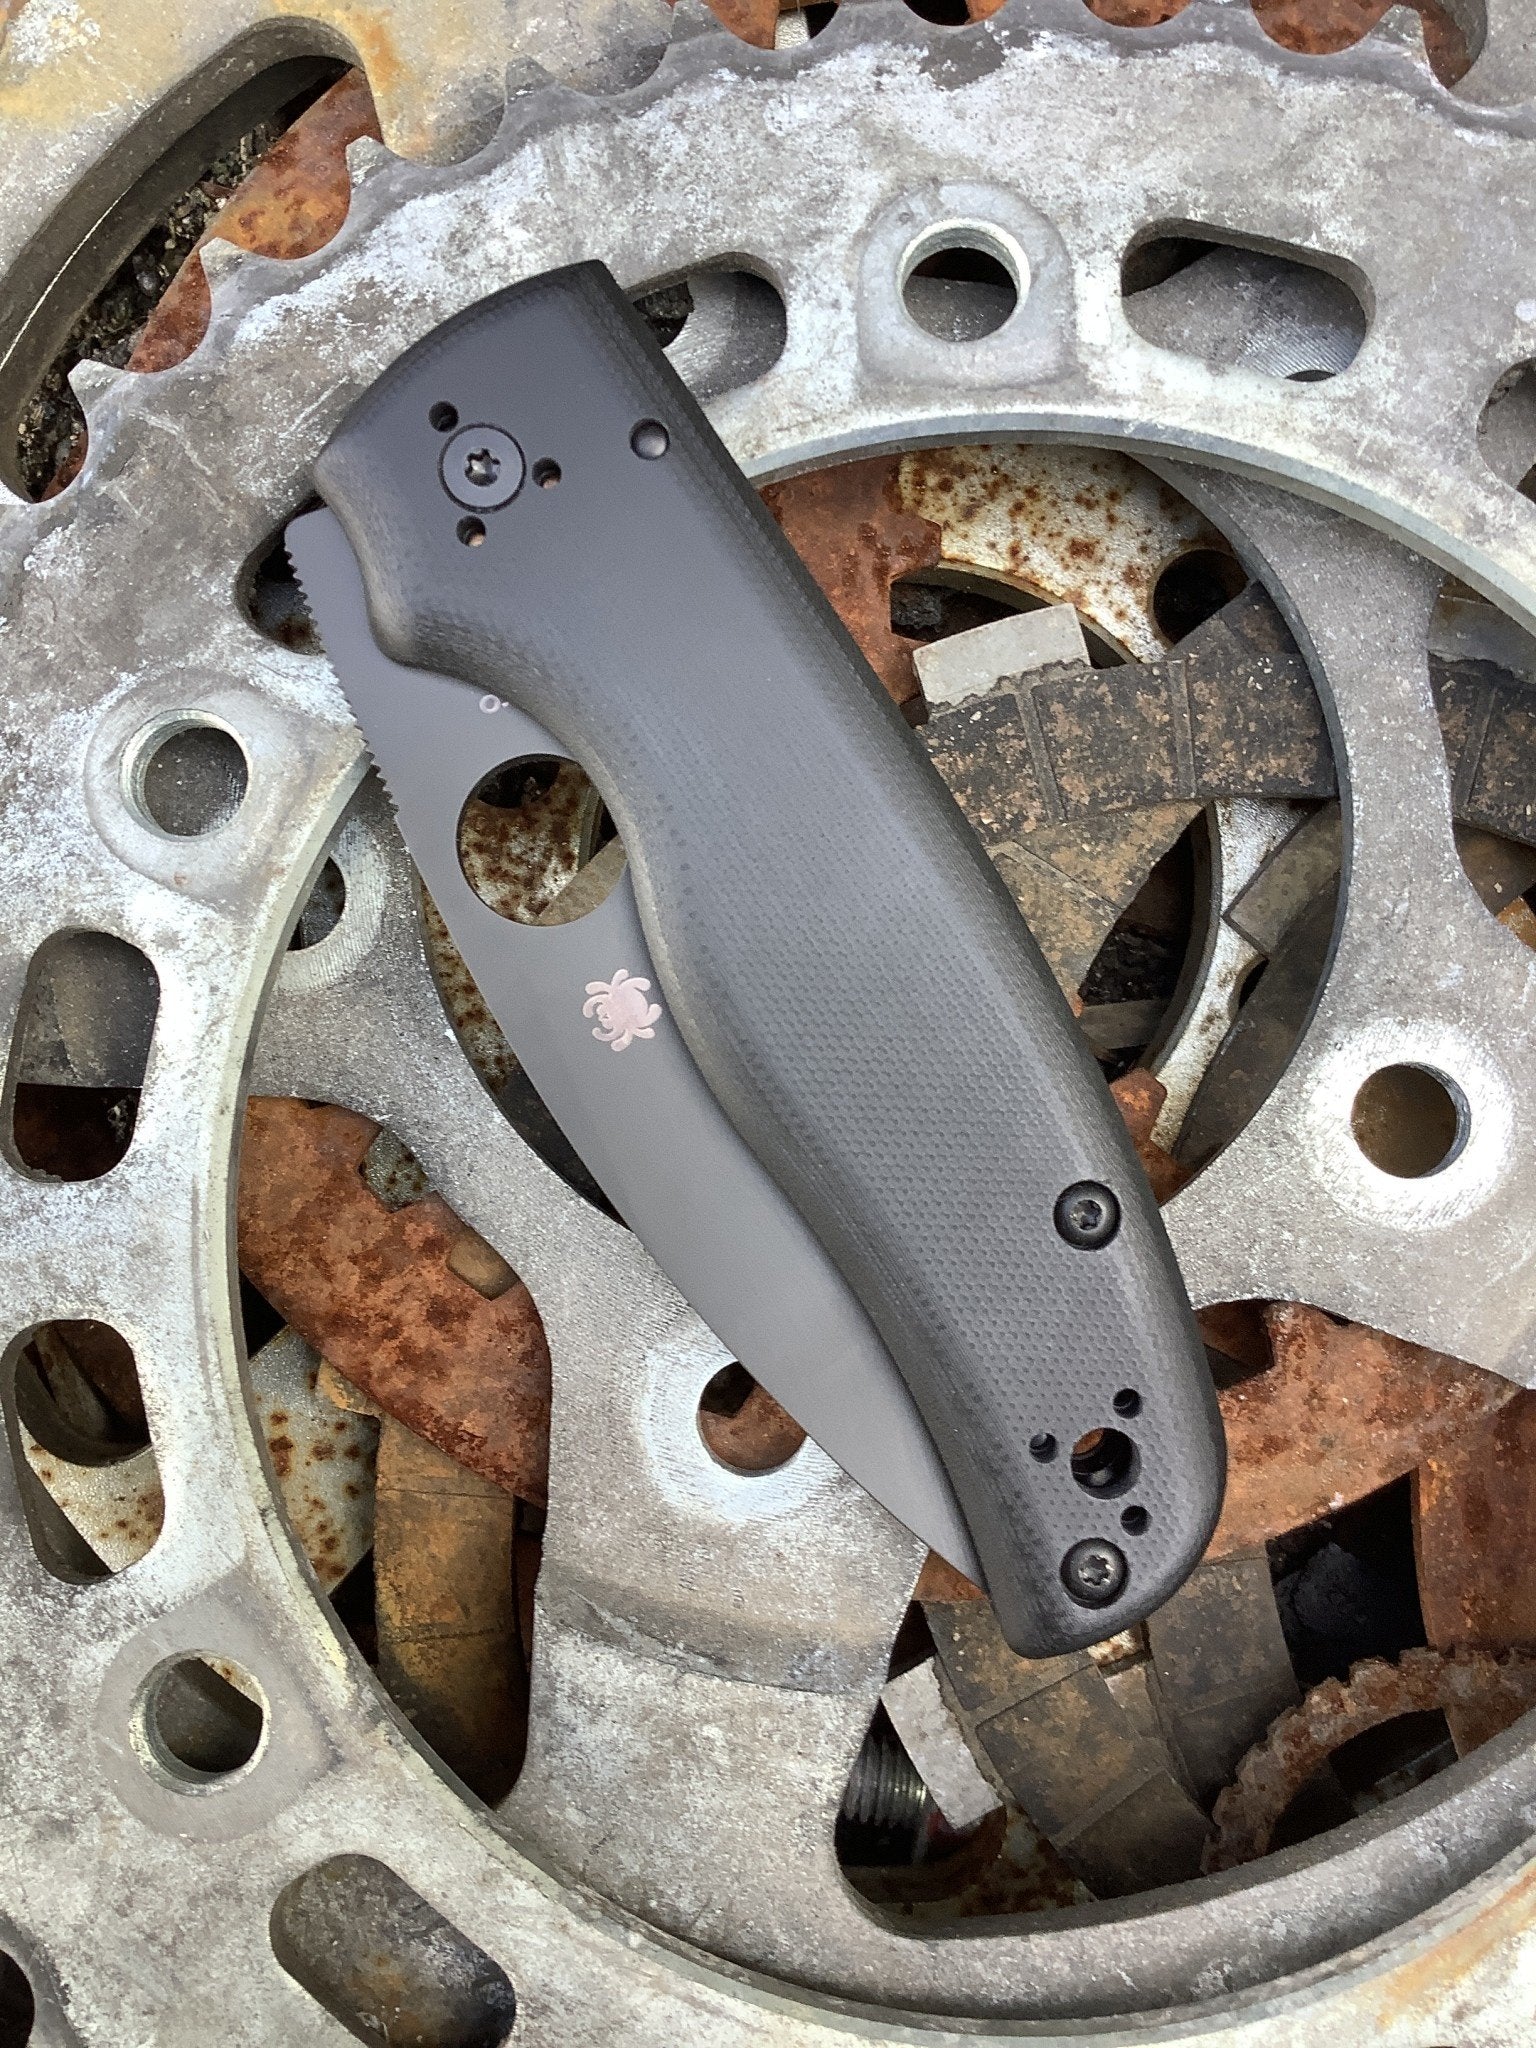 Spyderco Shaman BK with S30V steel and Black G-10